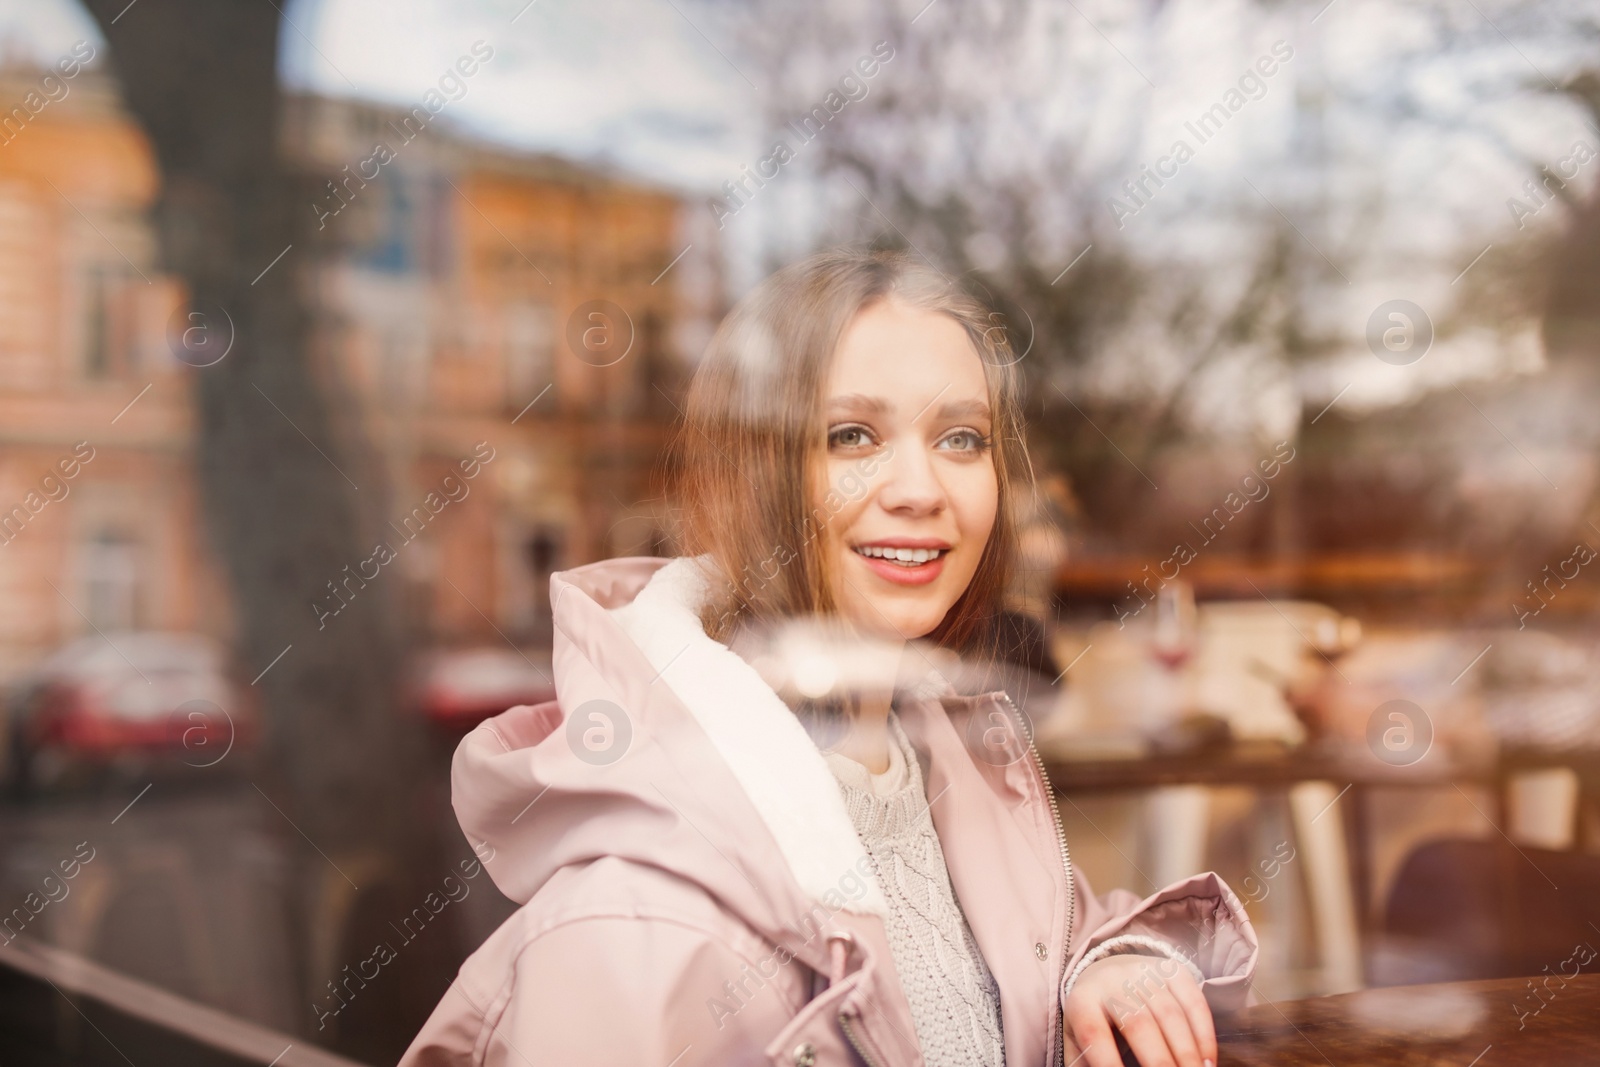 Photo of Beautiful young woman sitting at table in cafe, view from outdoors through window